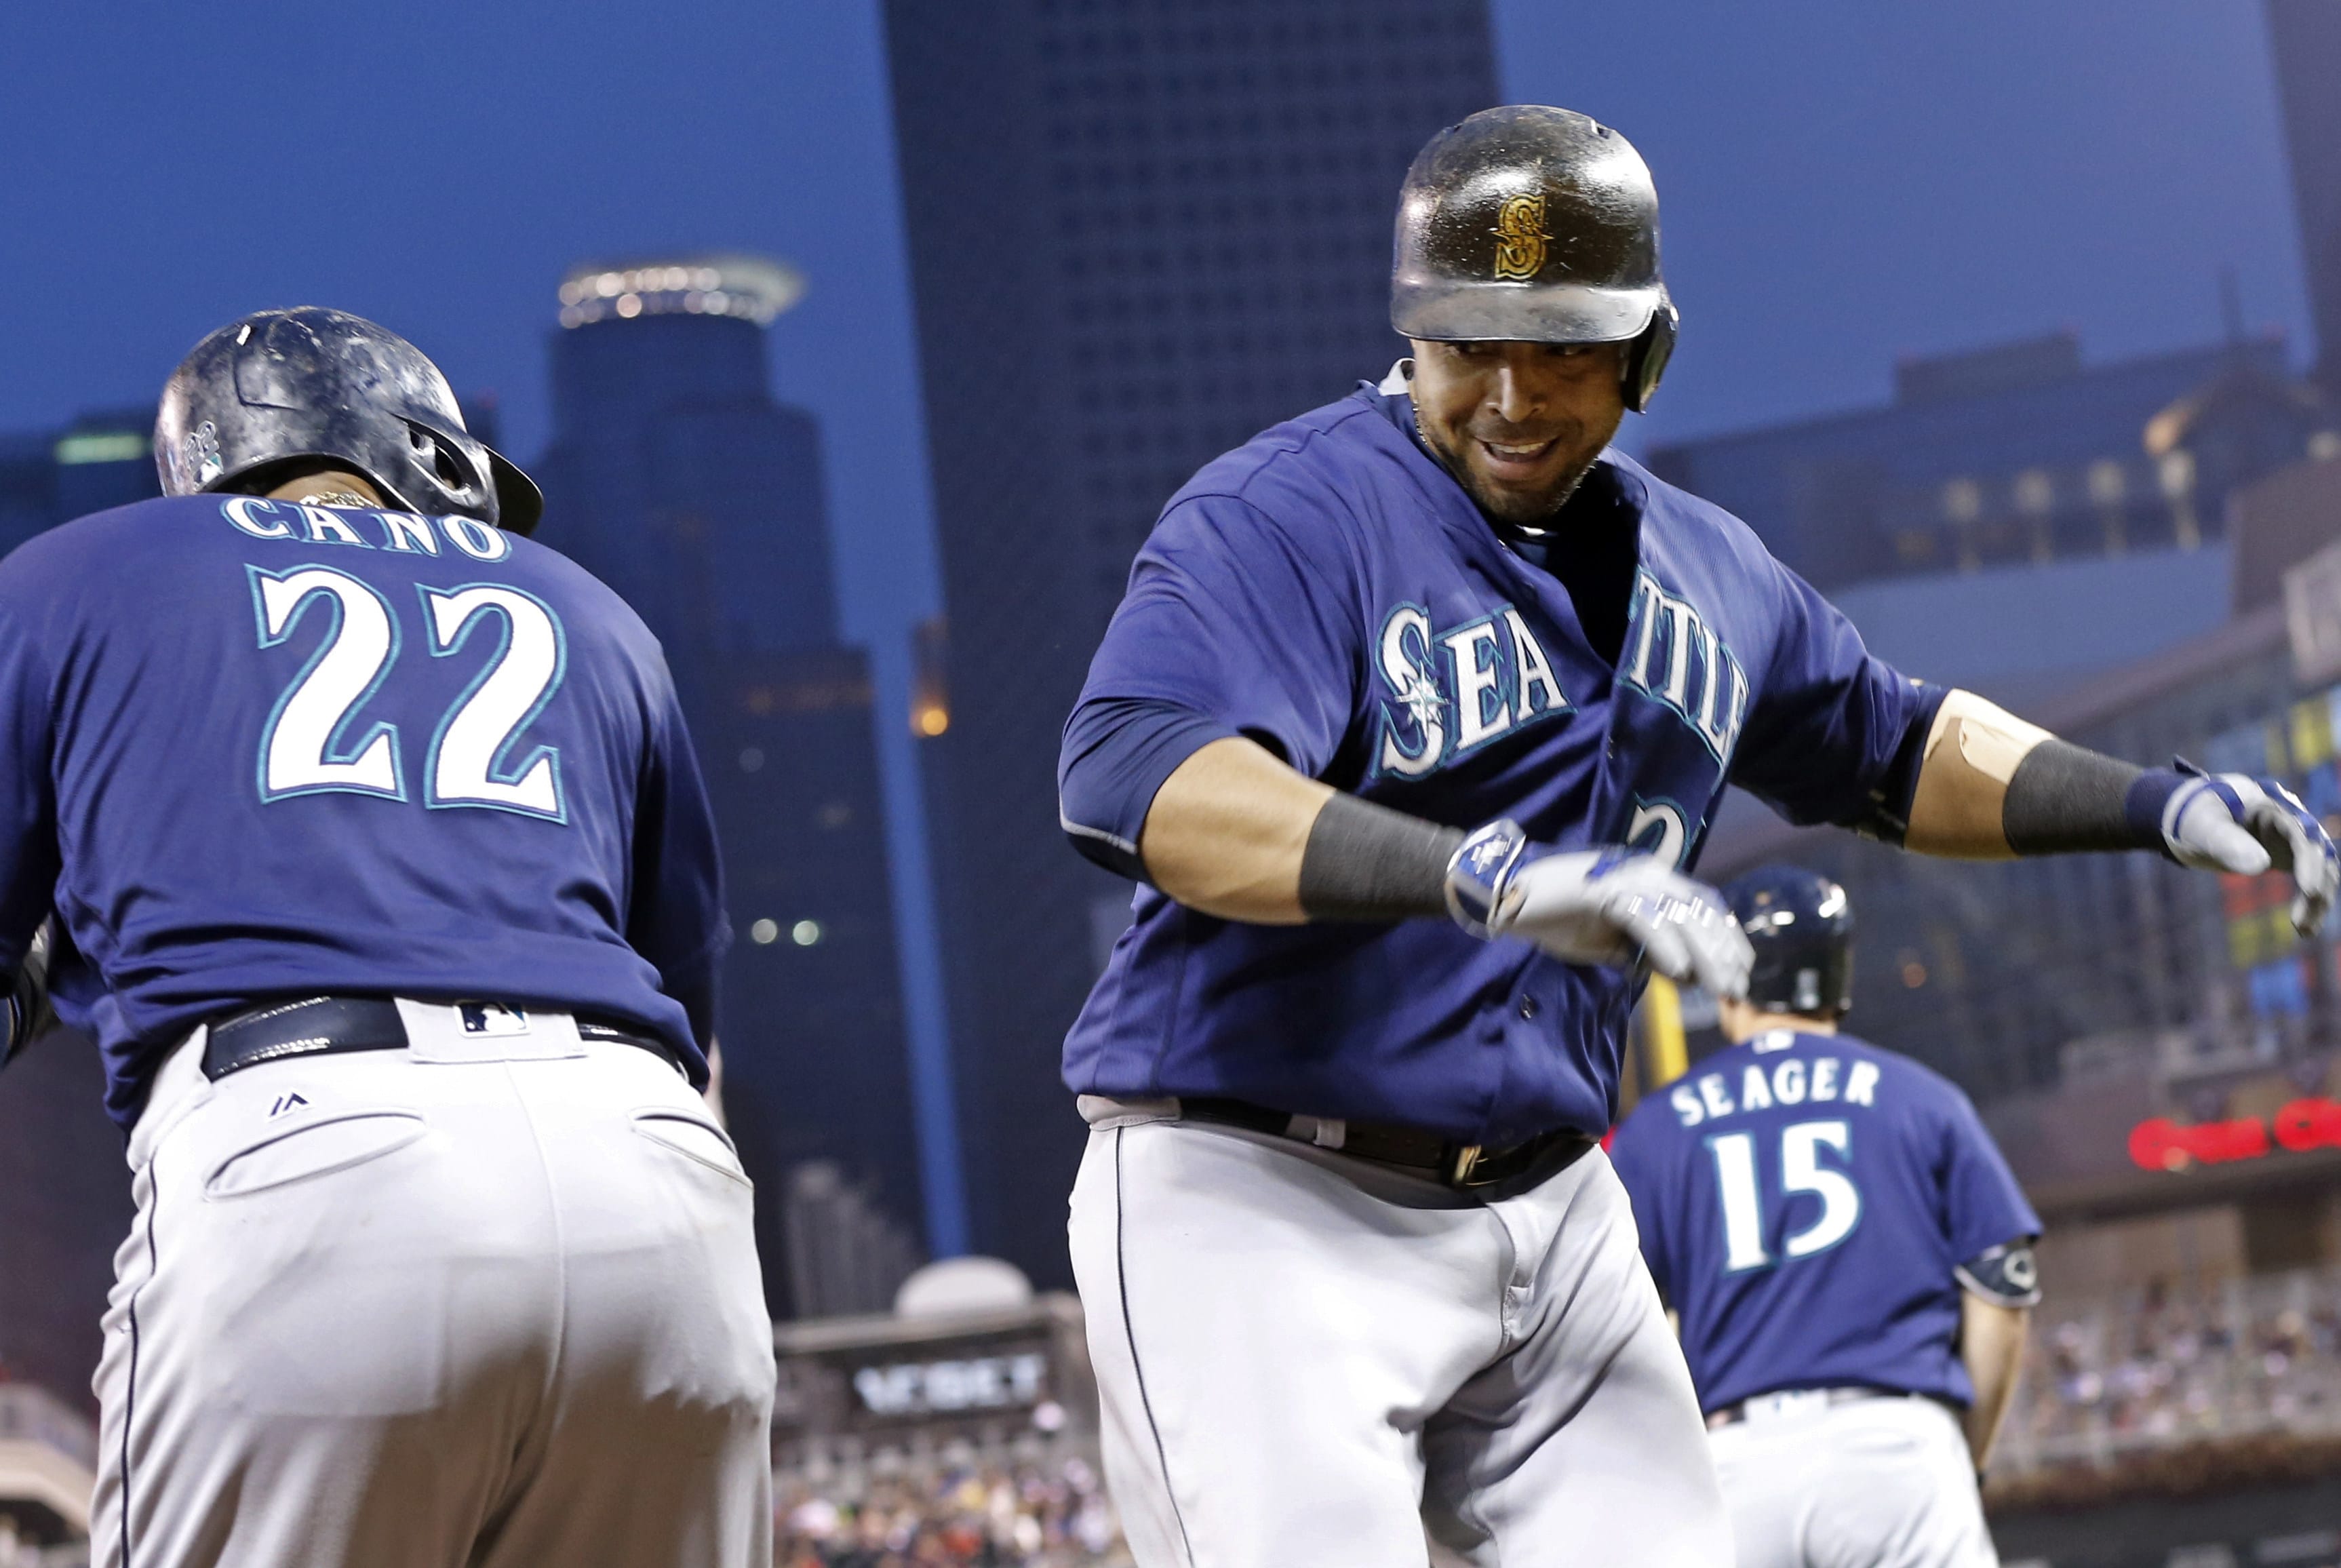 Cruz's monster HR not enough to help Mariners - The Columbian